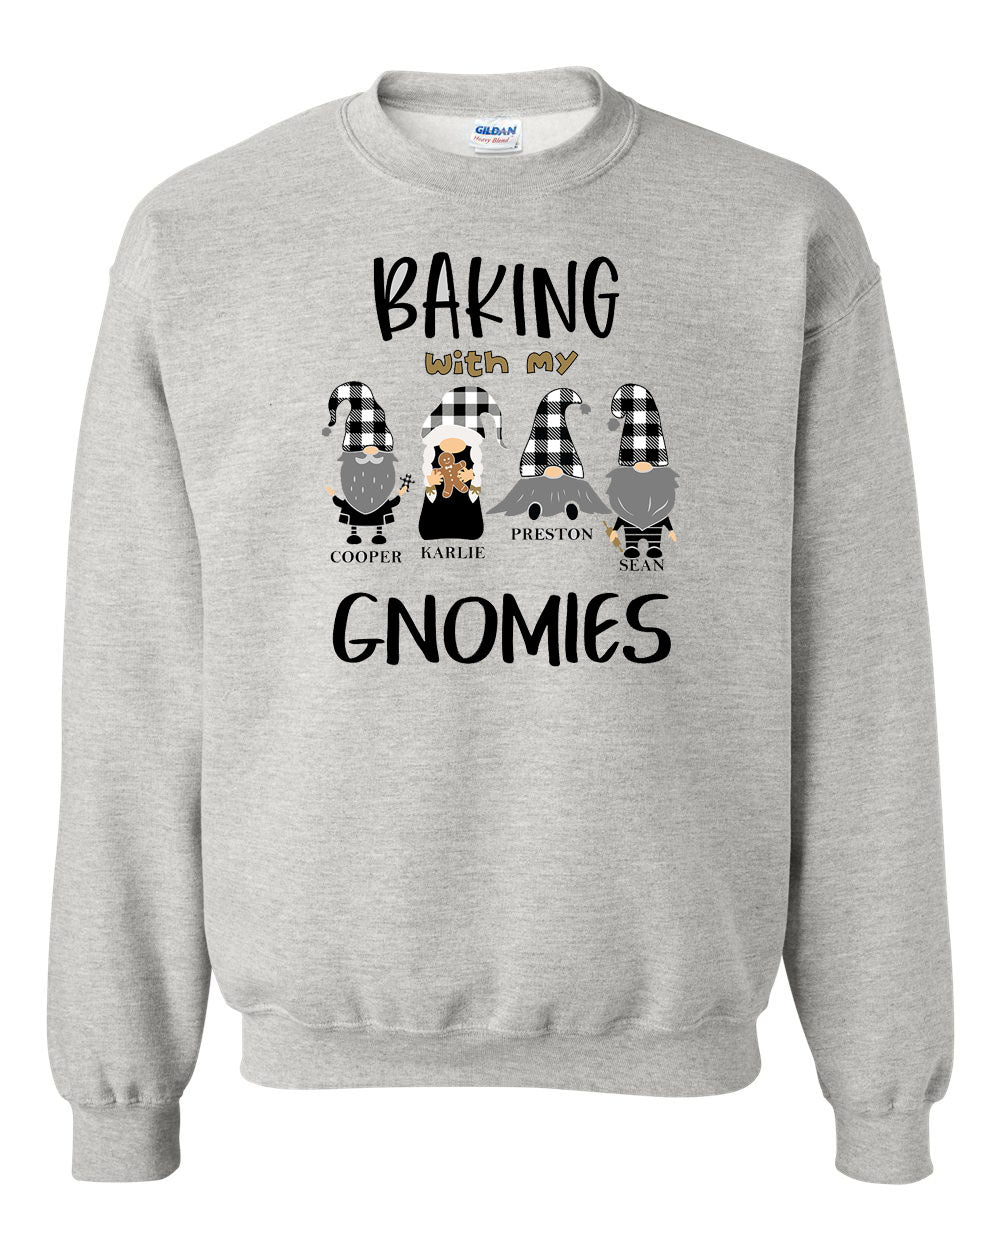 Baking with my Gnomies non hooded sweatshirt